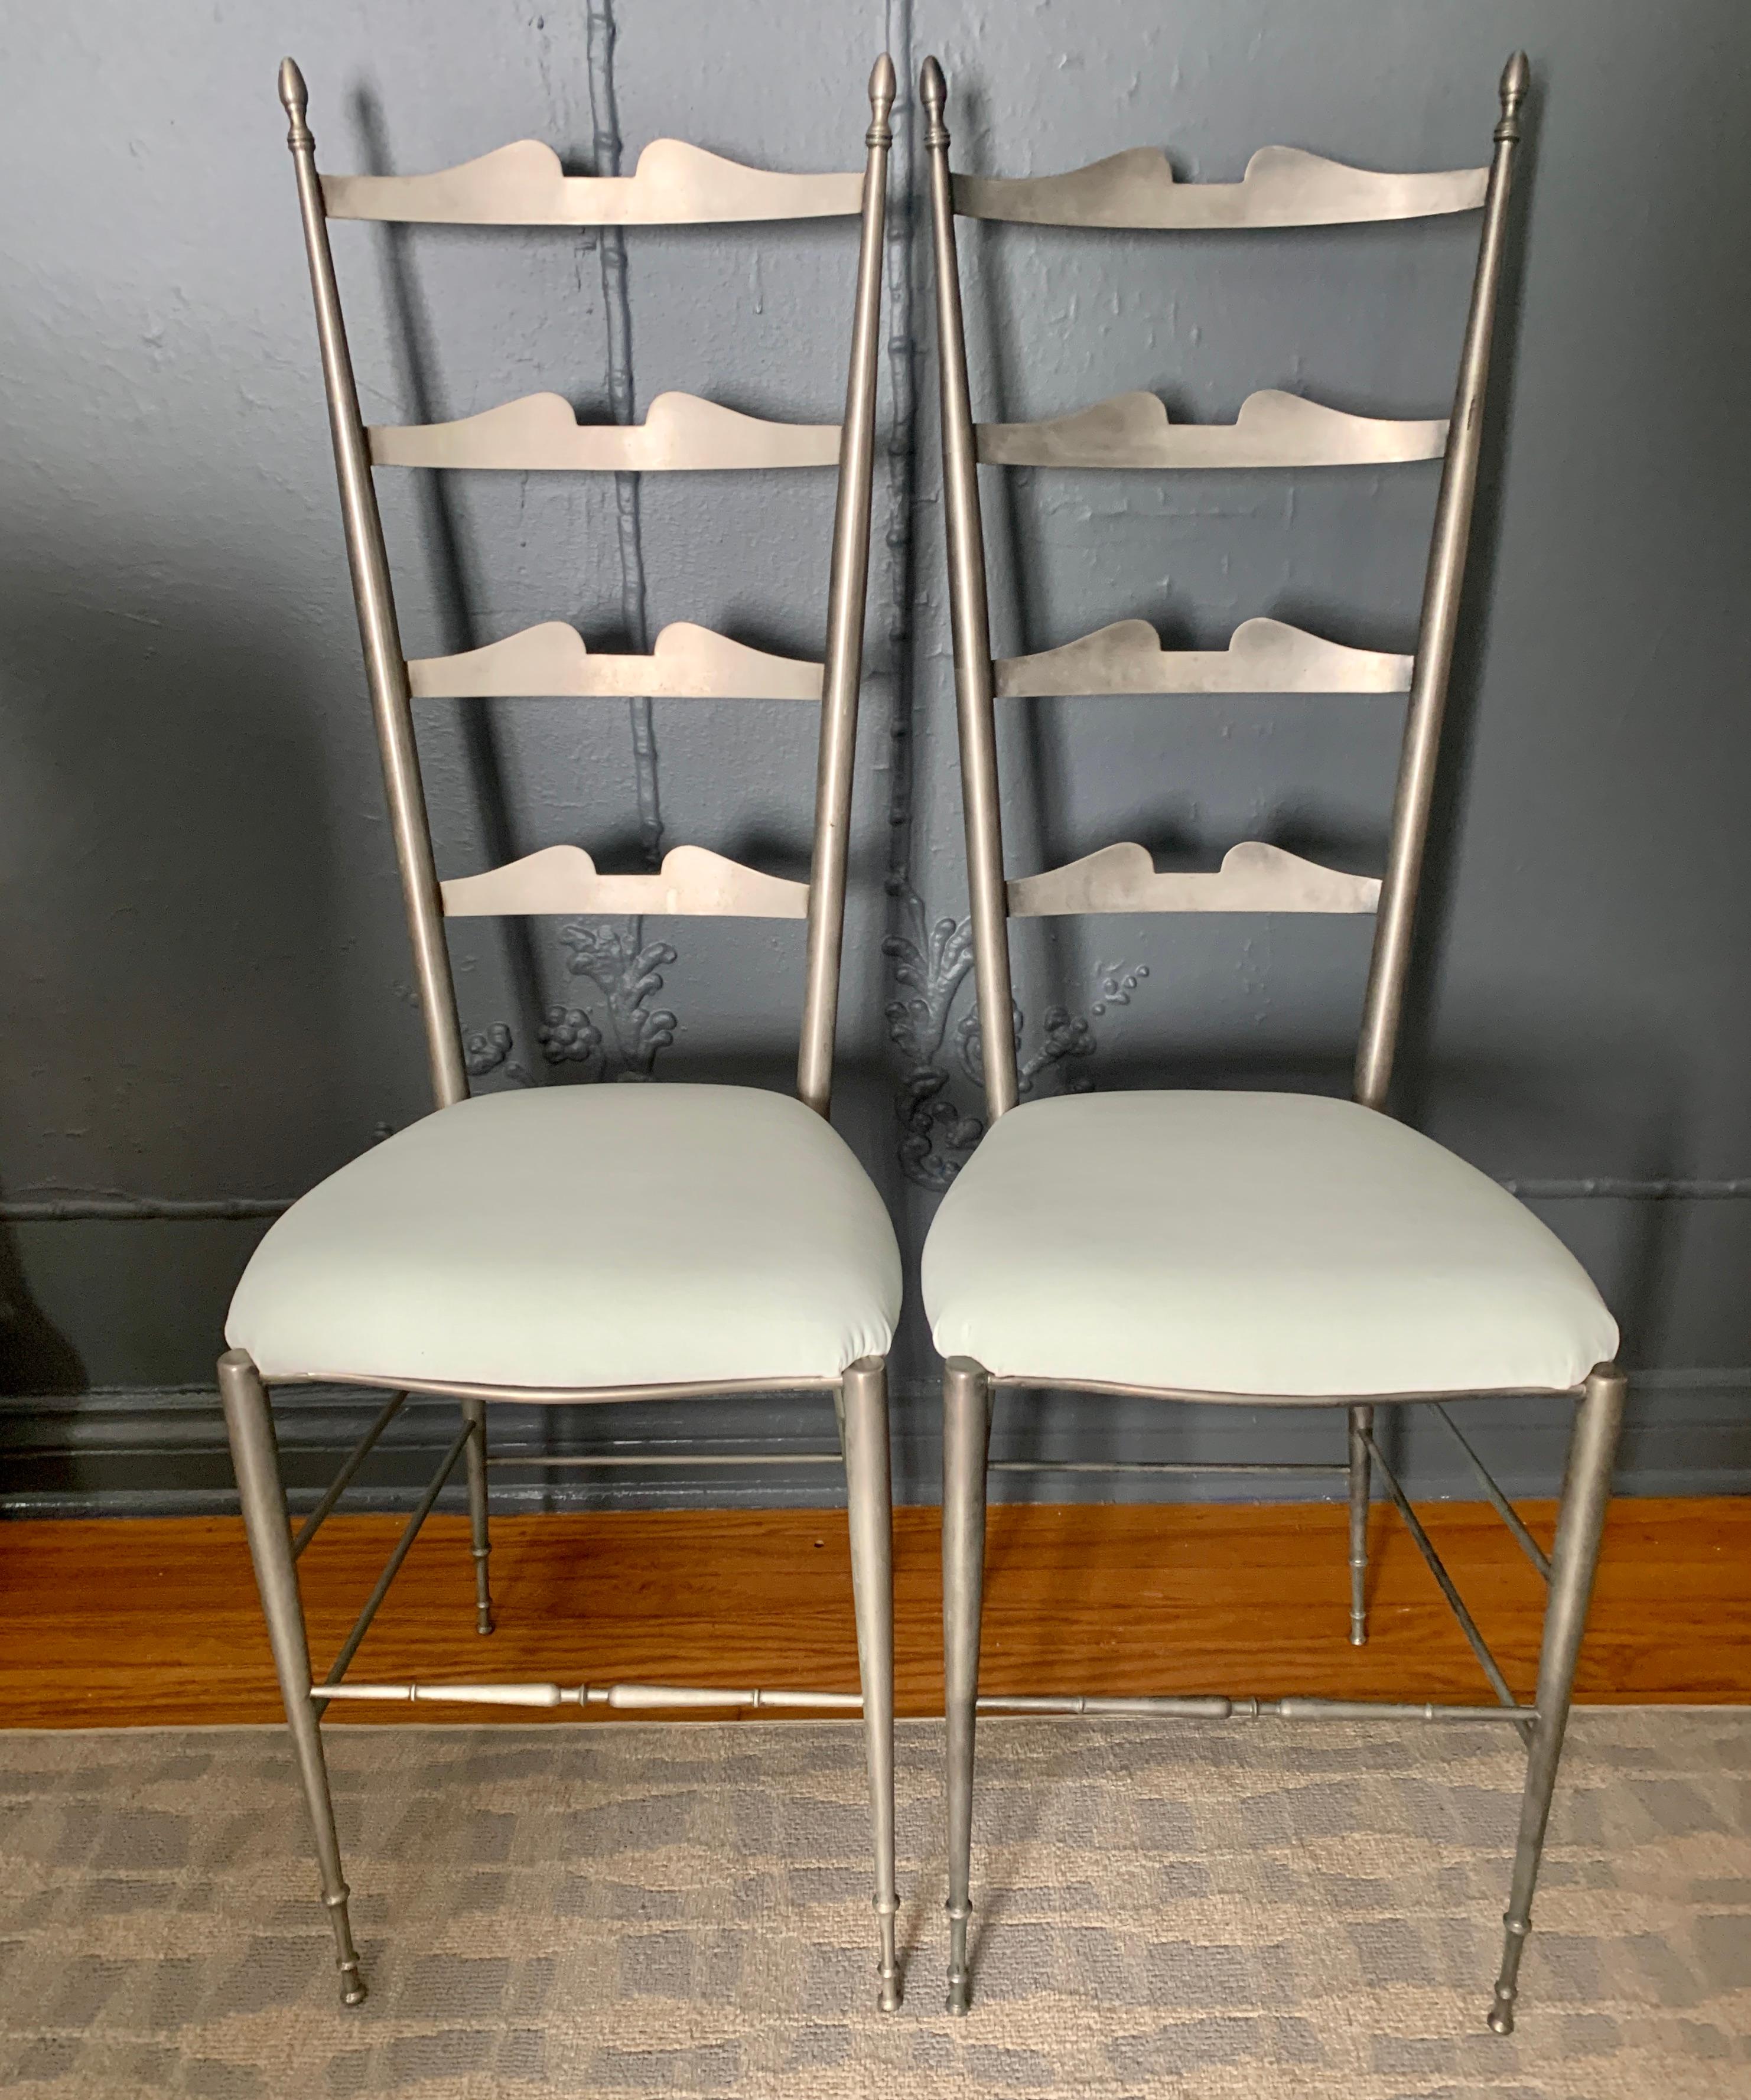 Pair of Chiavari Italian chairs, in a rarely seen pewter metallic finish. The pair feature a lovely and graceful ladder back and are newly upholstered in Belgian Velvet. A stunning pair to flank a doorway, a wonderful decorative touch.

The pair